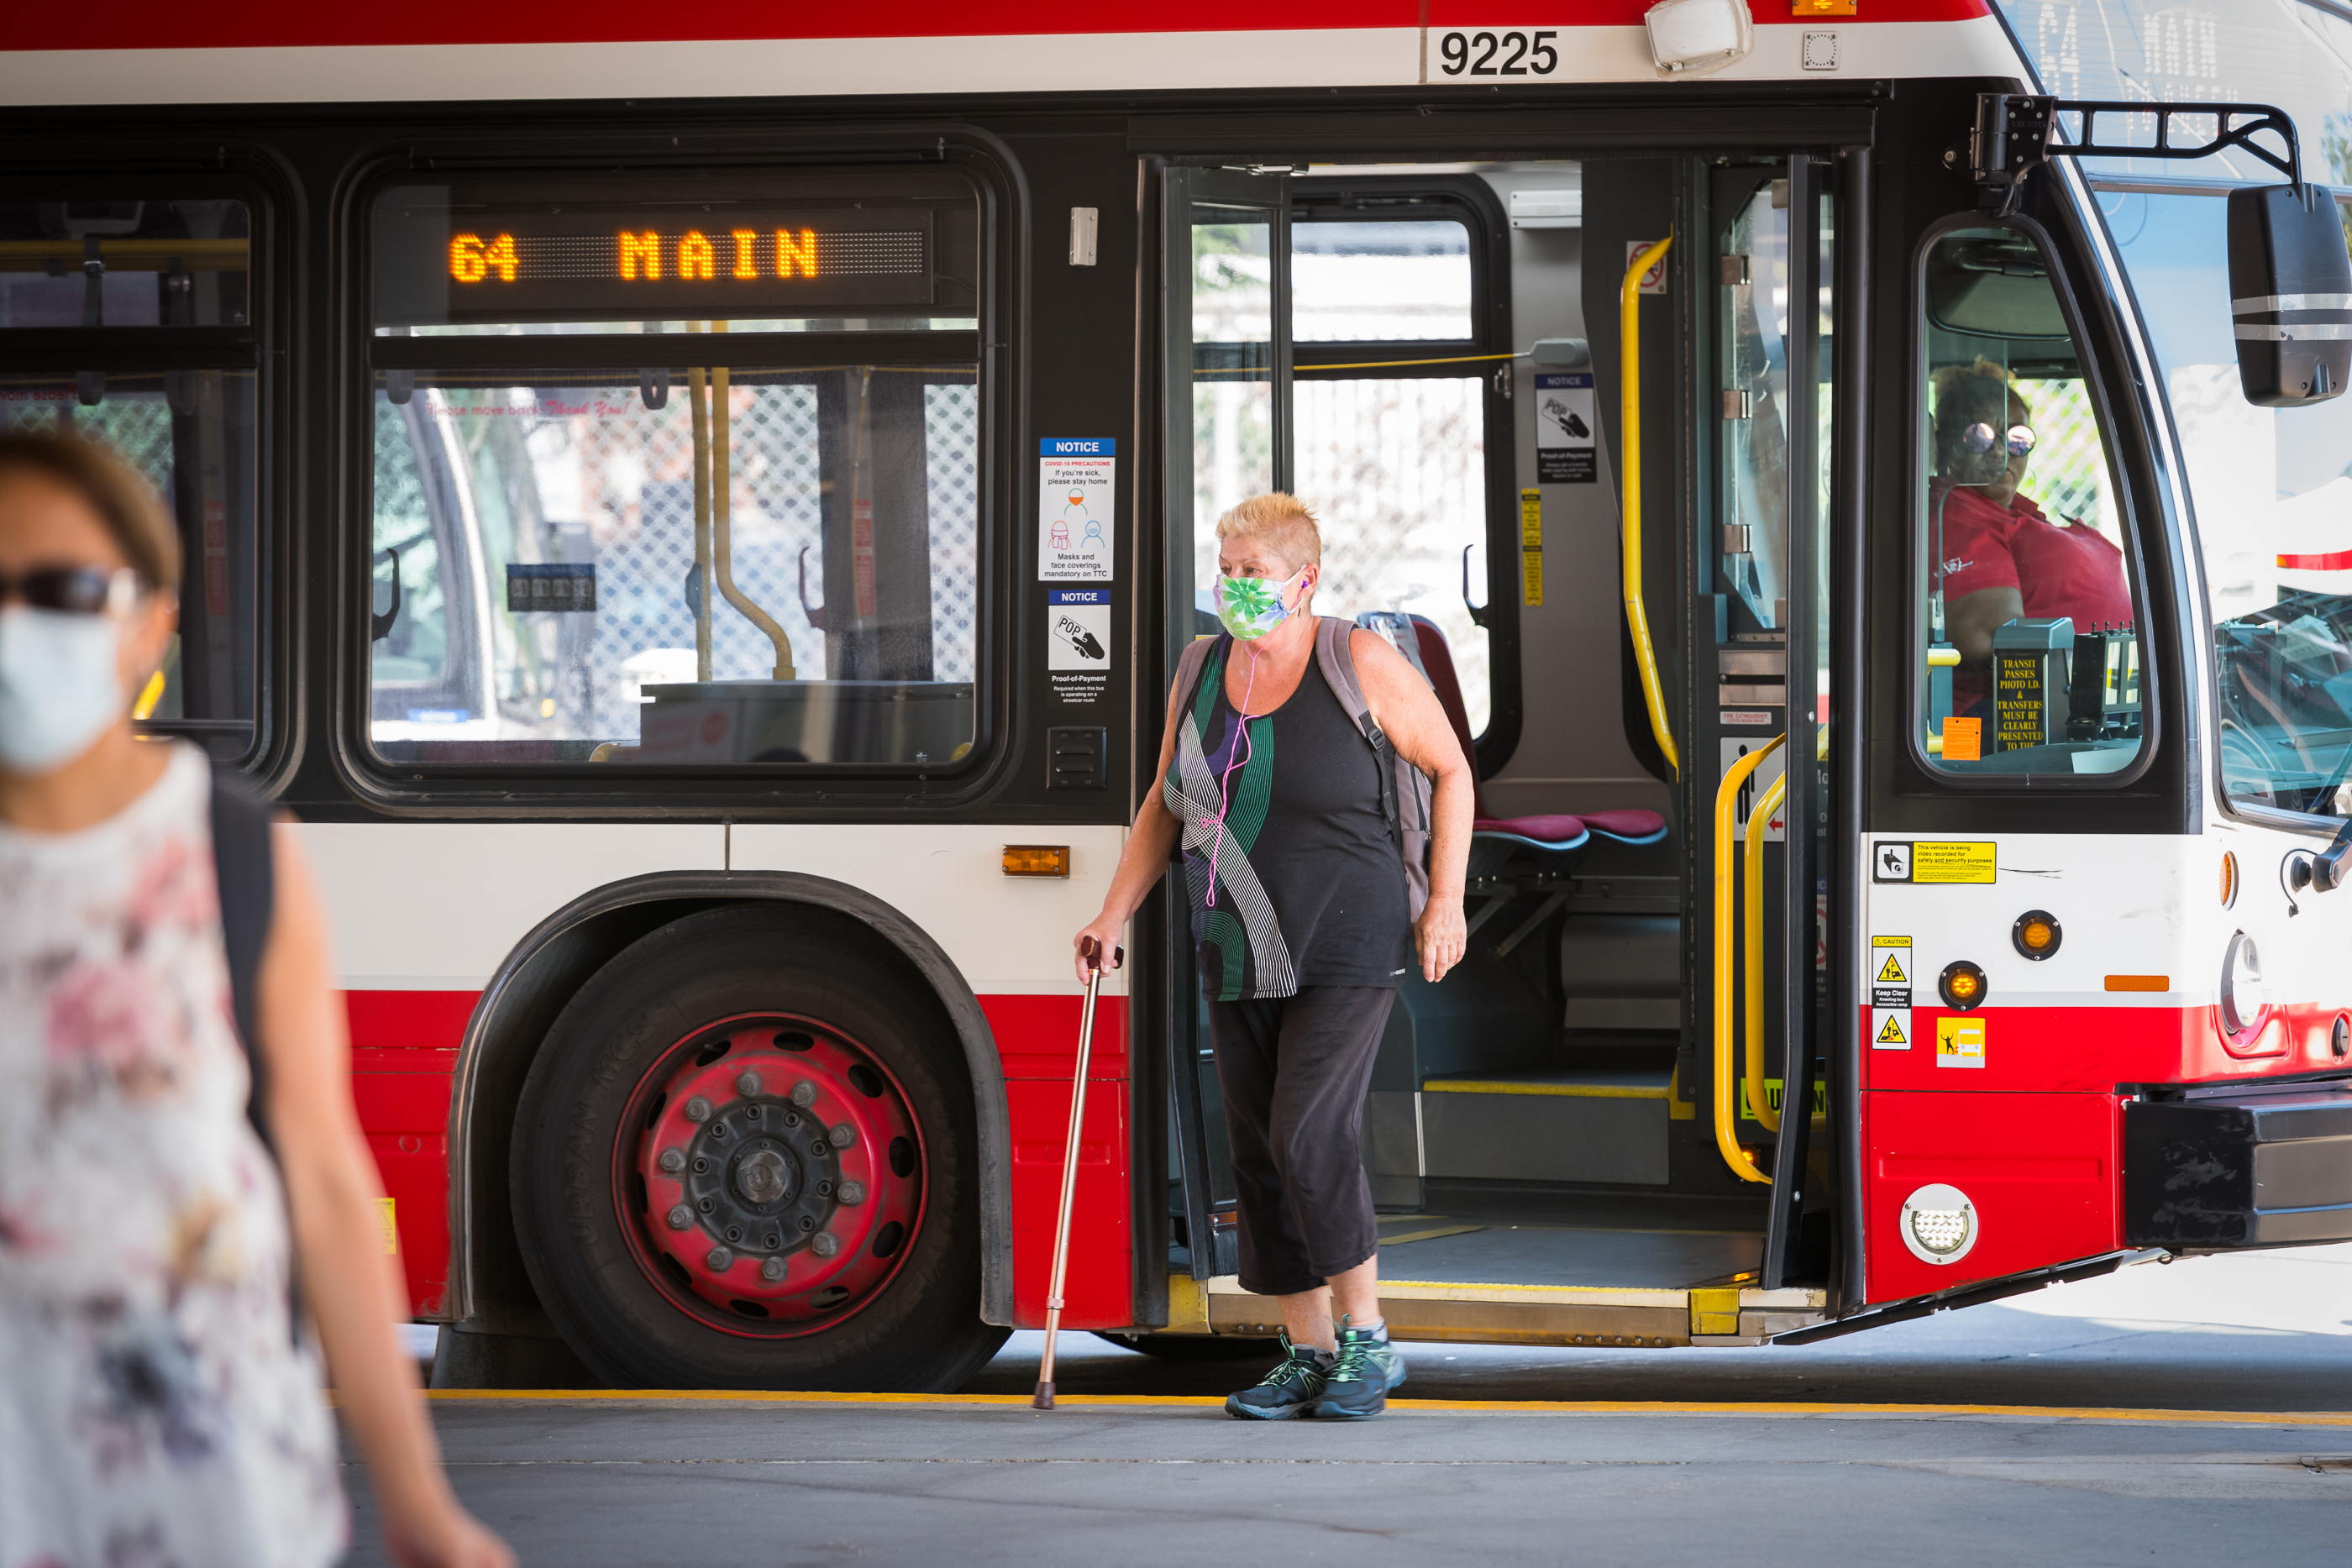 Customer wearing a face mask deboards a 64 Main route bus at a terminal station.